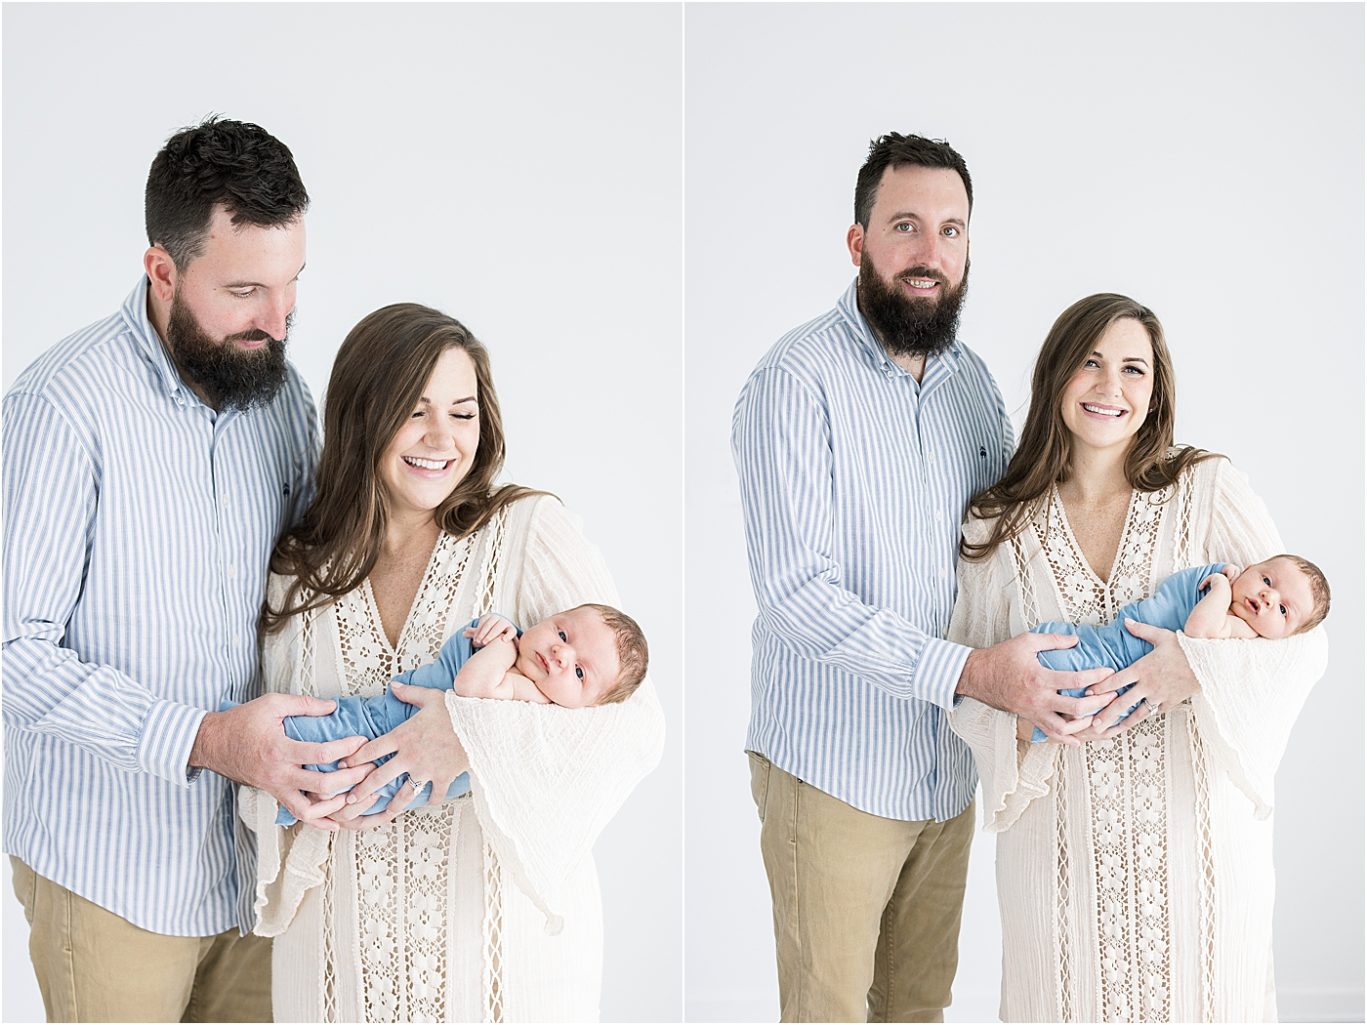 Studio newborn session for baby boy from Indianapolis | Lindsay Konopa Photography